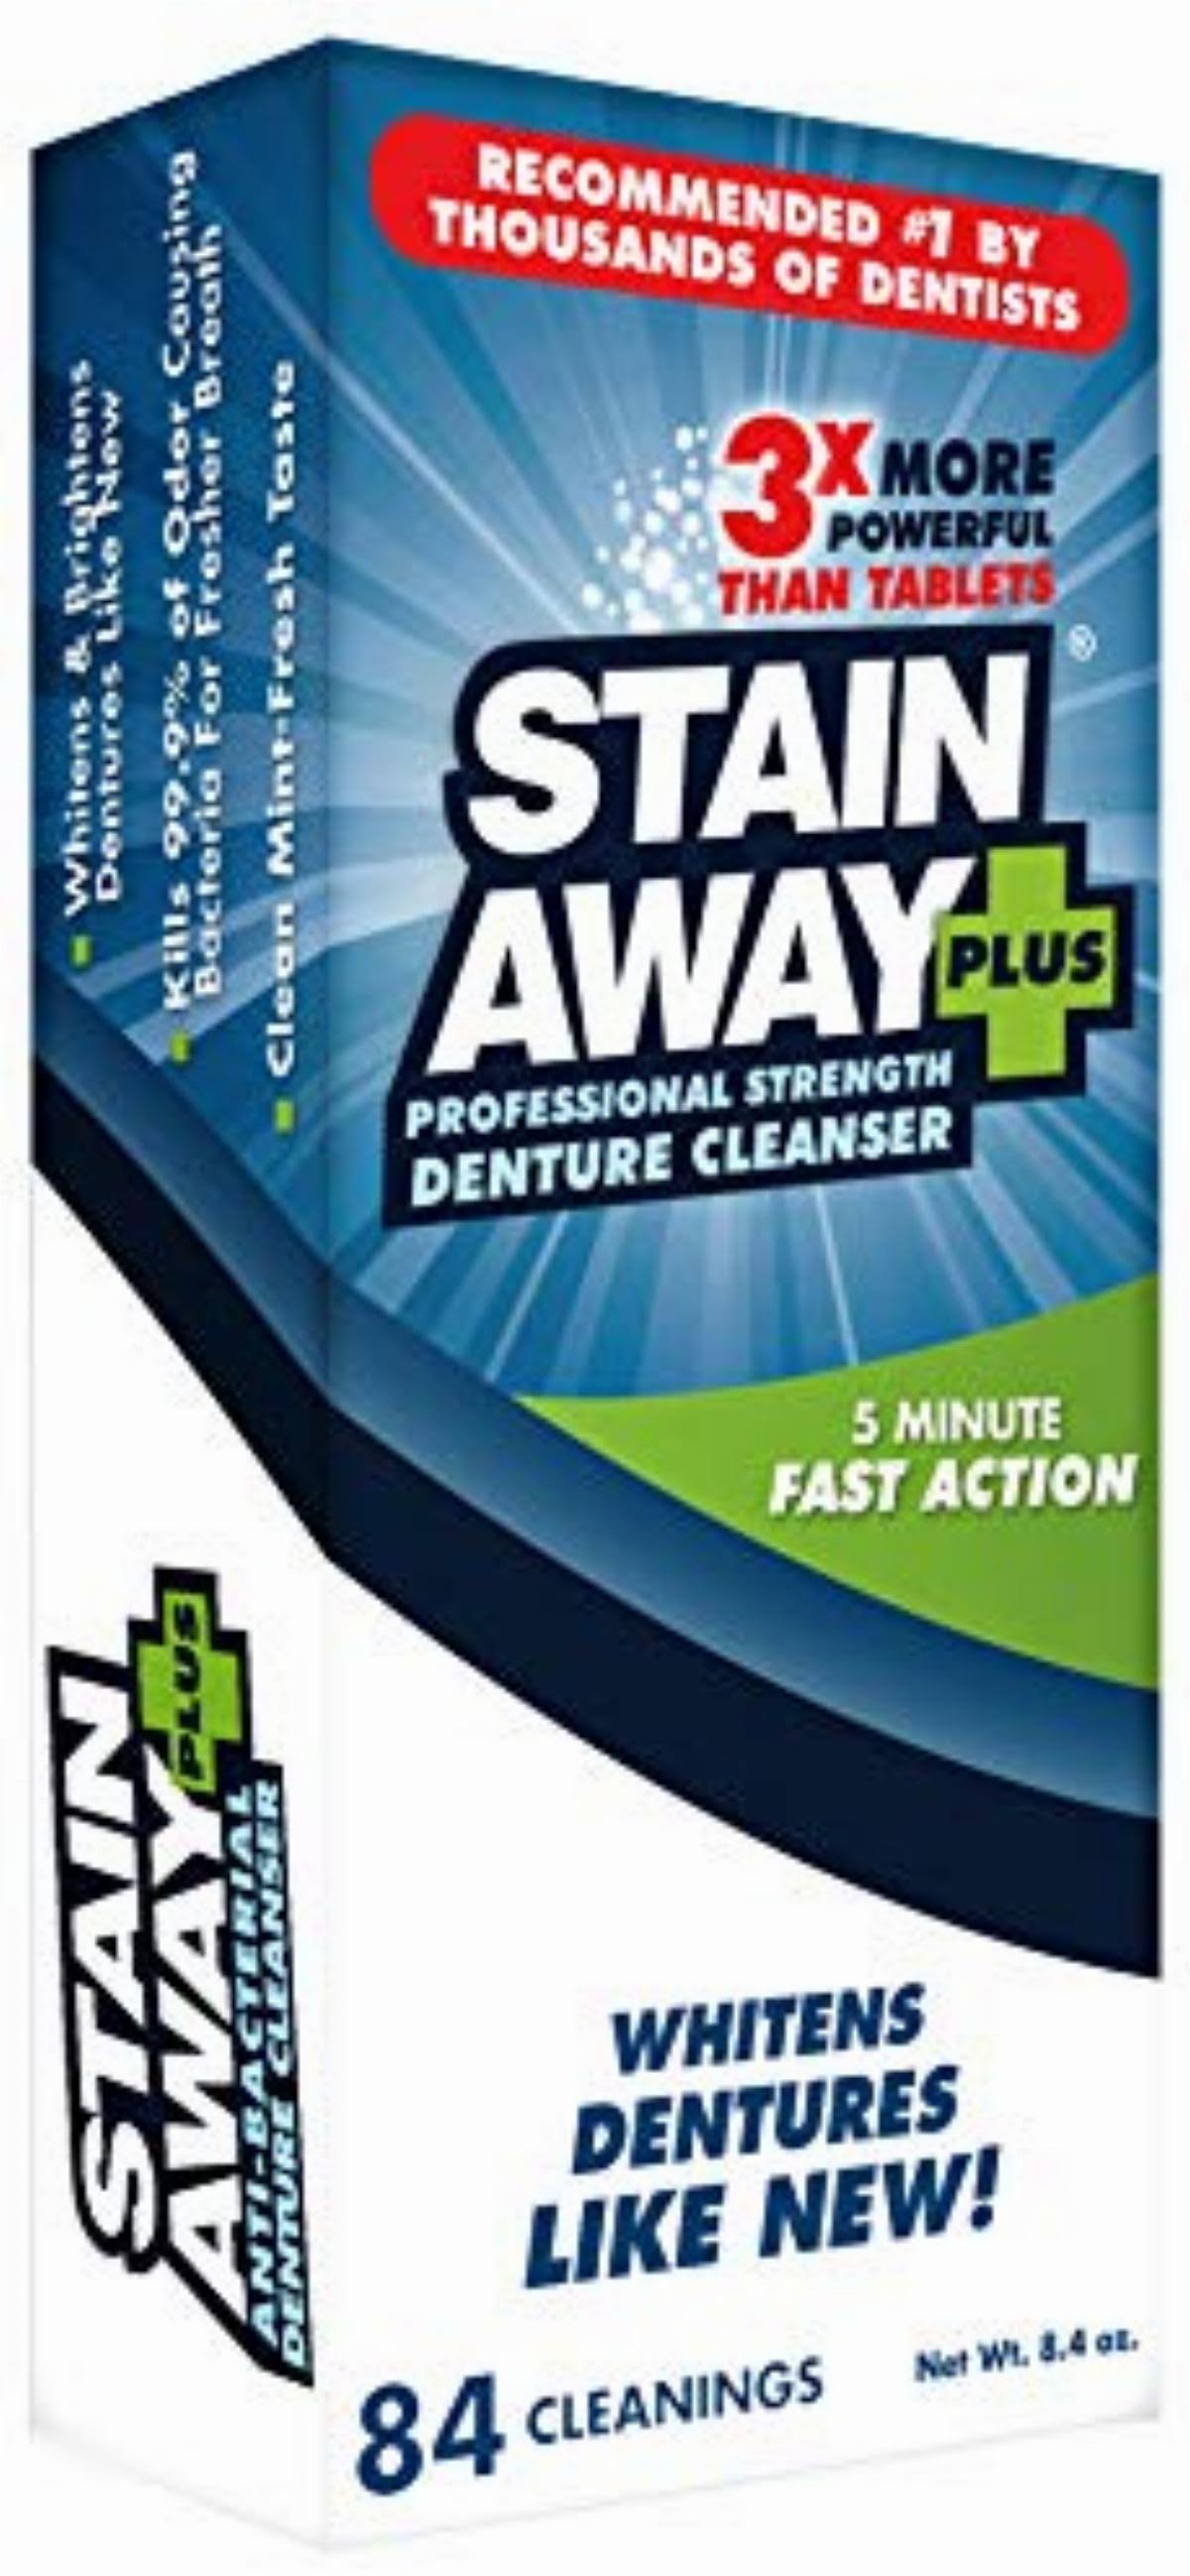 Stain Away Plus Professional Strength Denture Cleanser - 8.1oz, 80 Count